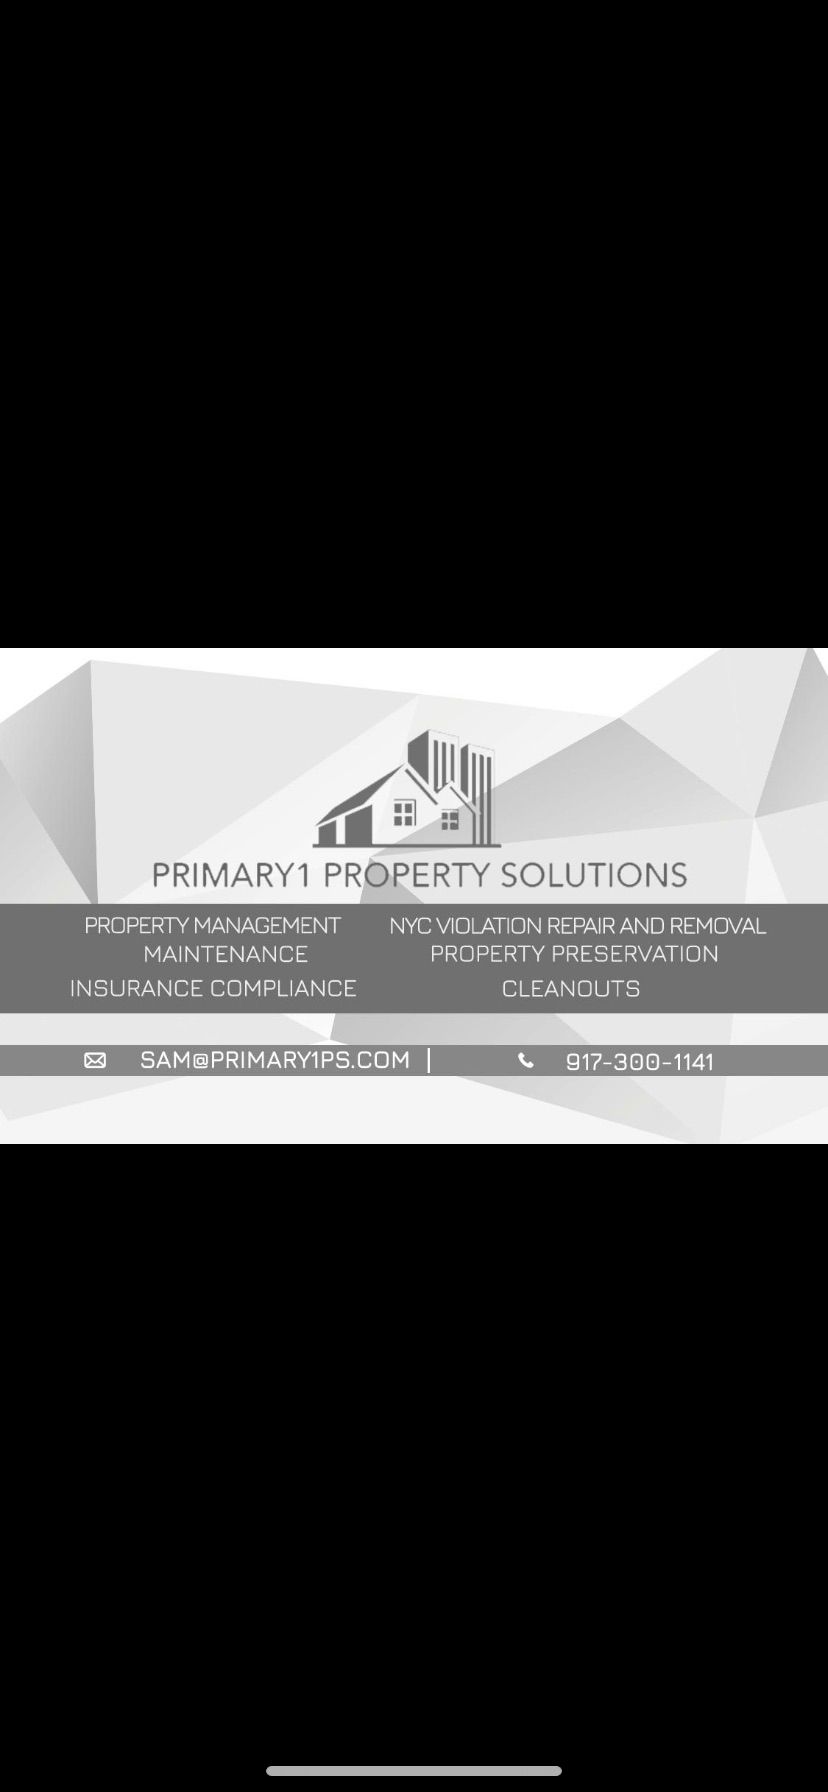 Primary 1 property solutions